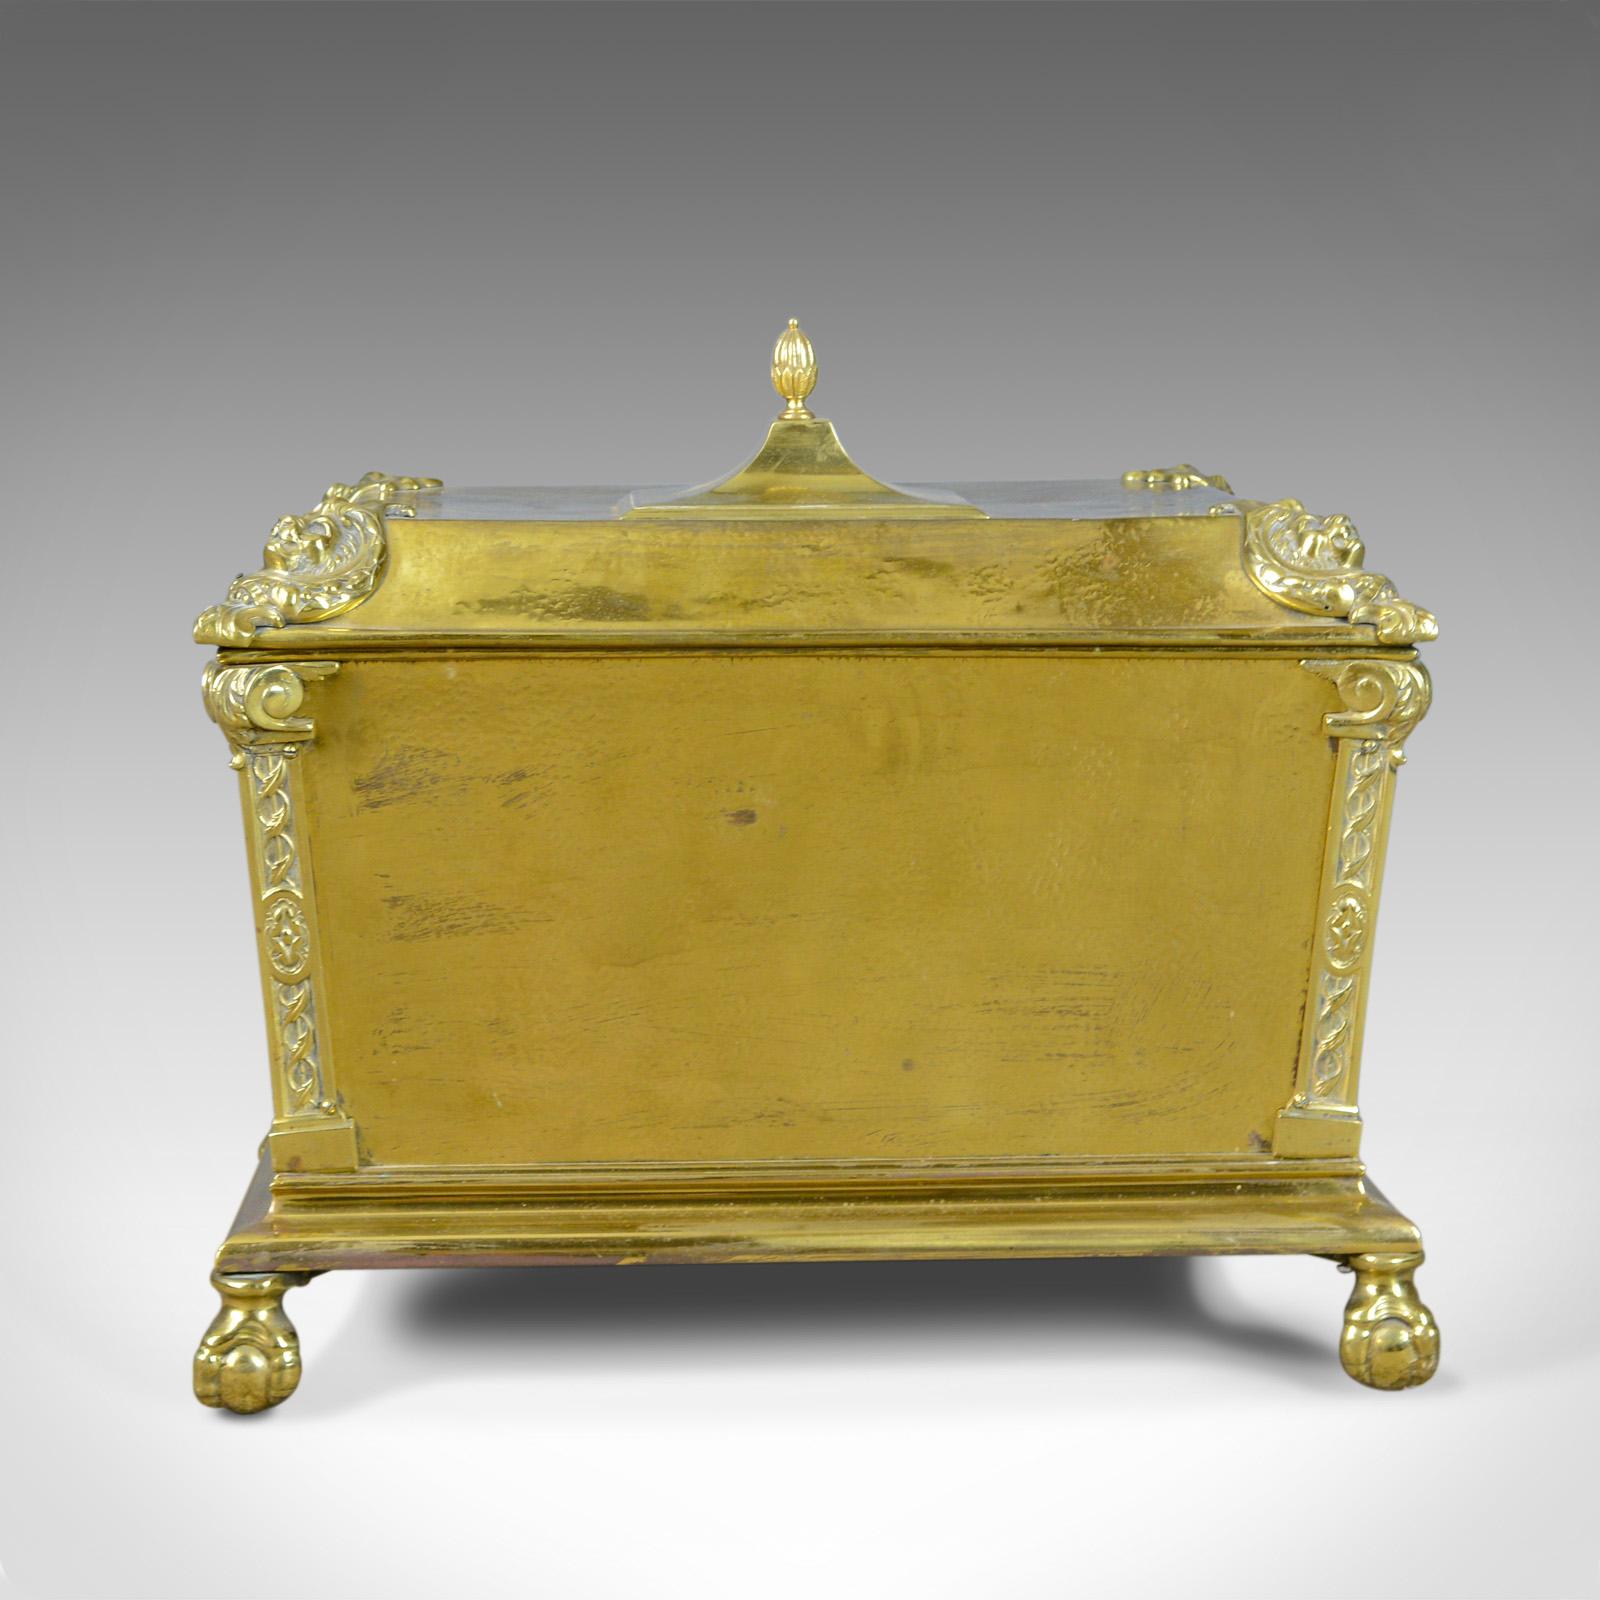 This is an antique log bin, a brass fireside storage box for kindling, logs, coal or ash. An English, Victorian fireplace accessory dating to the late 19th century, circa 1880.

A pleasing, mid-size fireside storage bin in brass
Of classical